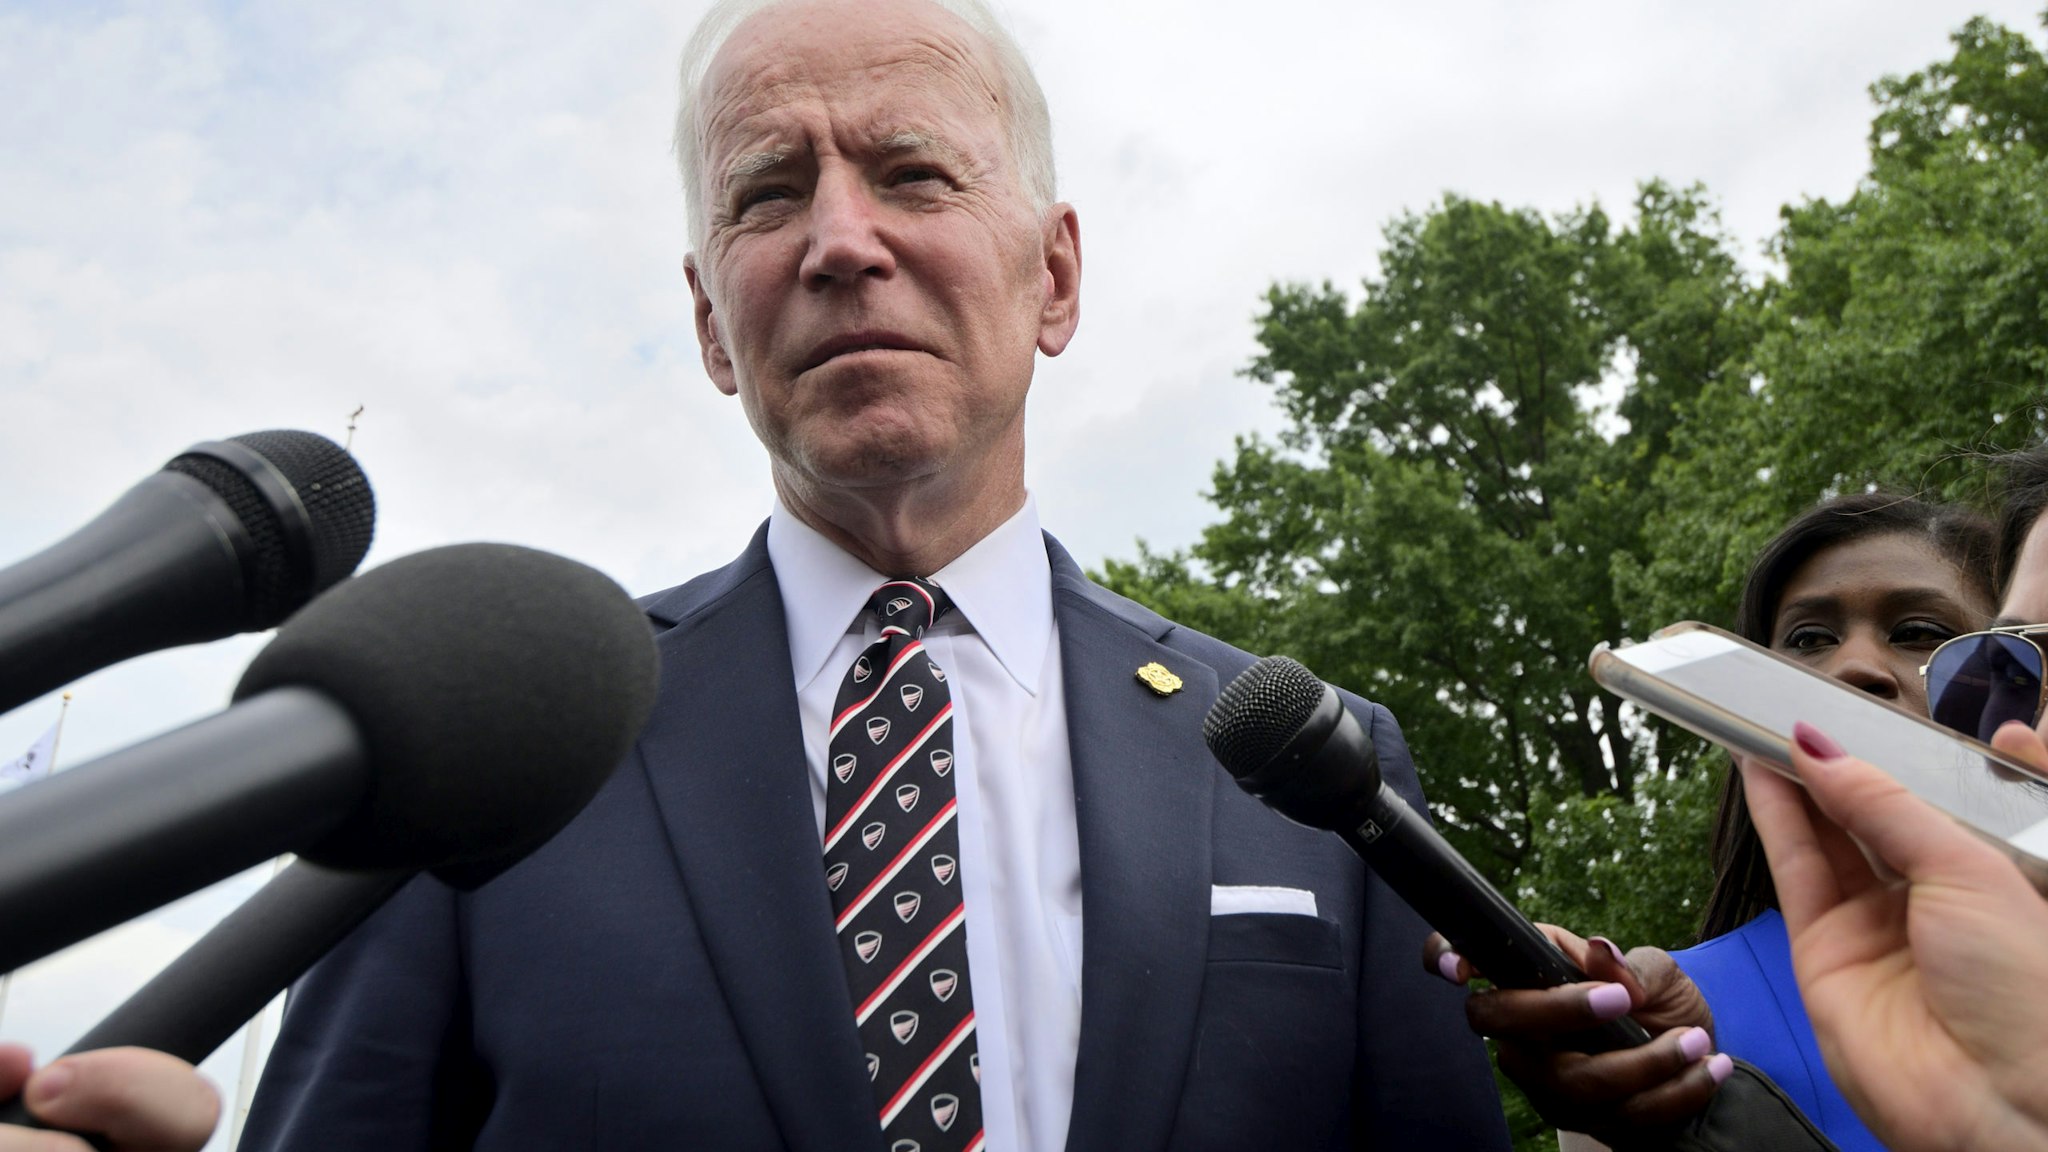 Former Vice President Joe Biden describes John McCain as a war hero when speaking at a press gaggle after attending the annual Delaware Memorial Day ceremony, in New Castle, DE on May 30, 2019. (Photo by Bastiaan Slabbers/NurPhoto via Getty Images)